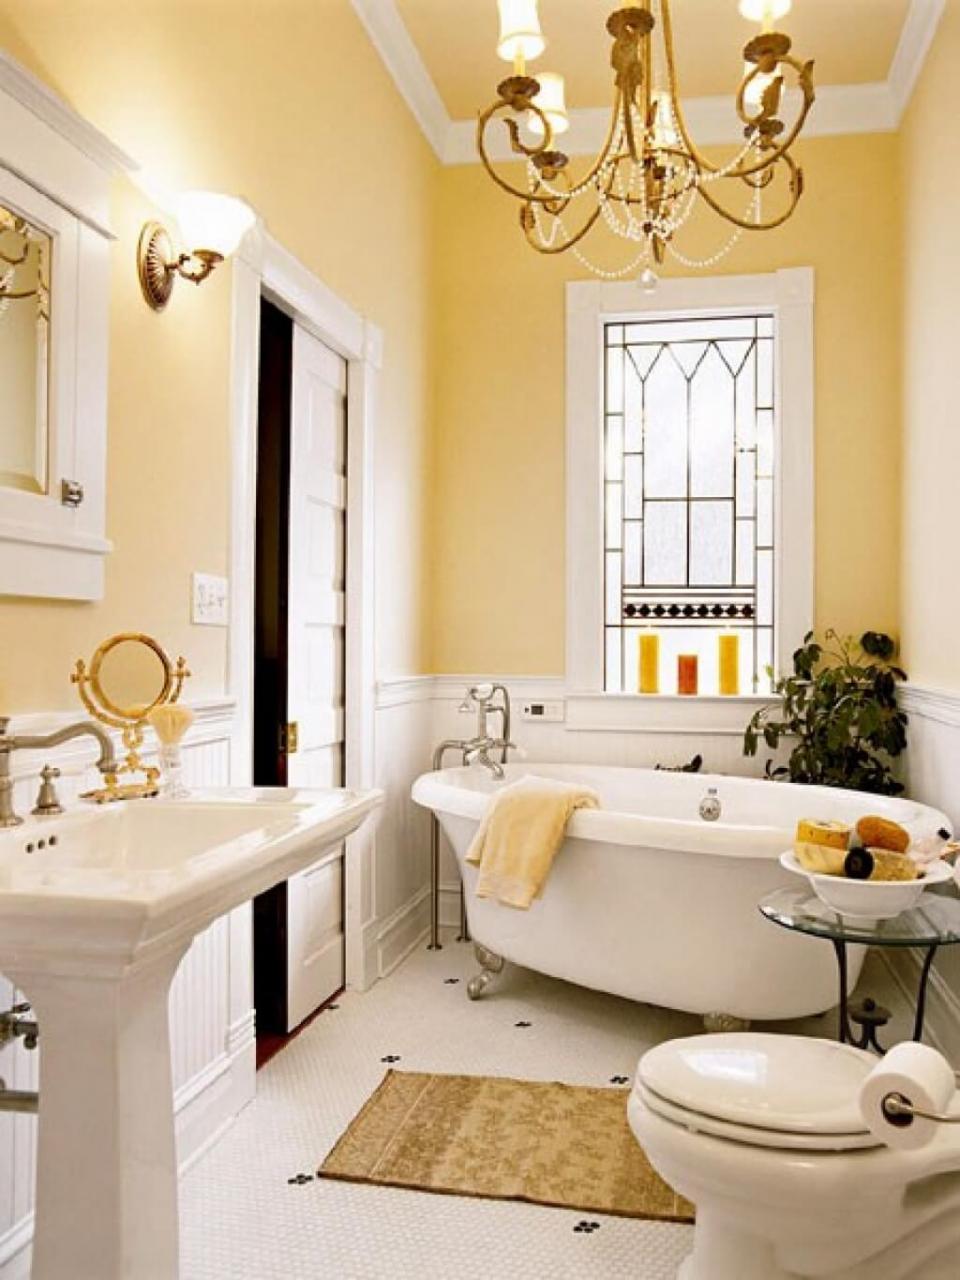 32 Best Small Bathroom Design Ideas and Decorations for 2021